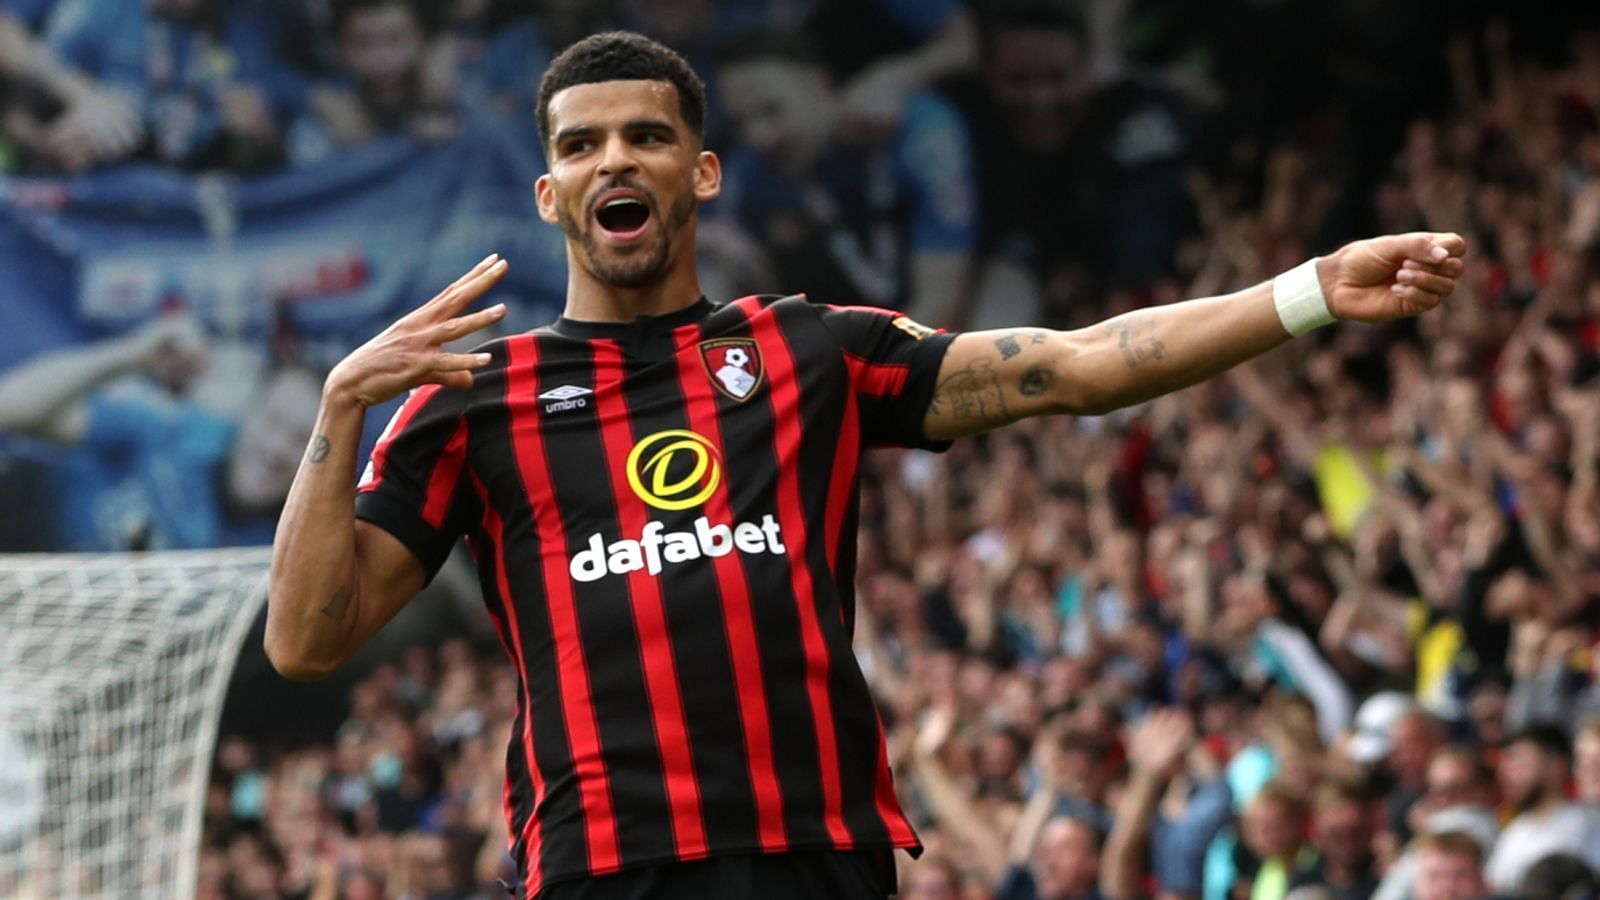 Dominic Solanke is the focal point of the Bournemouth attack.